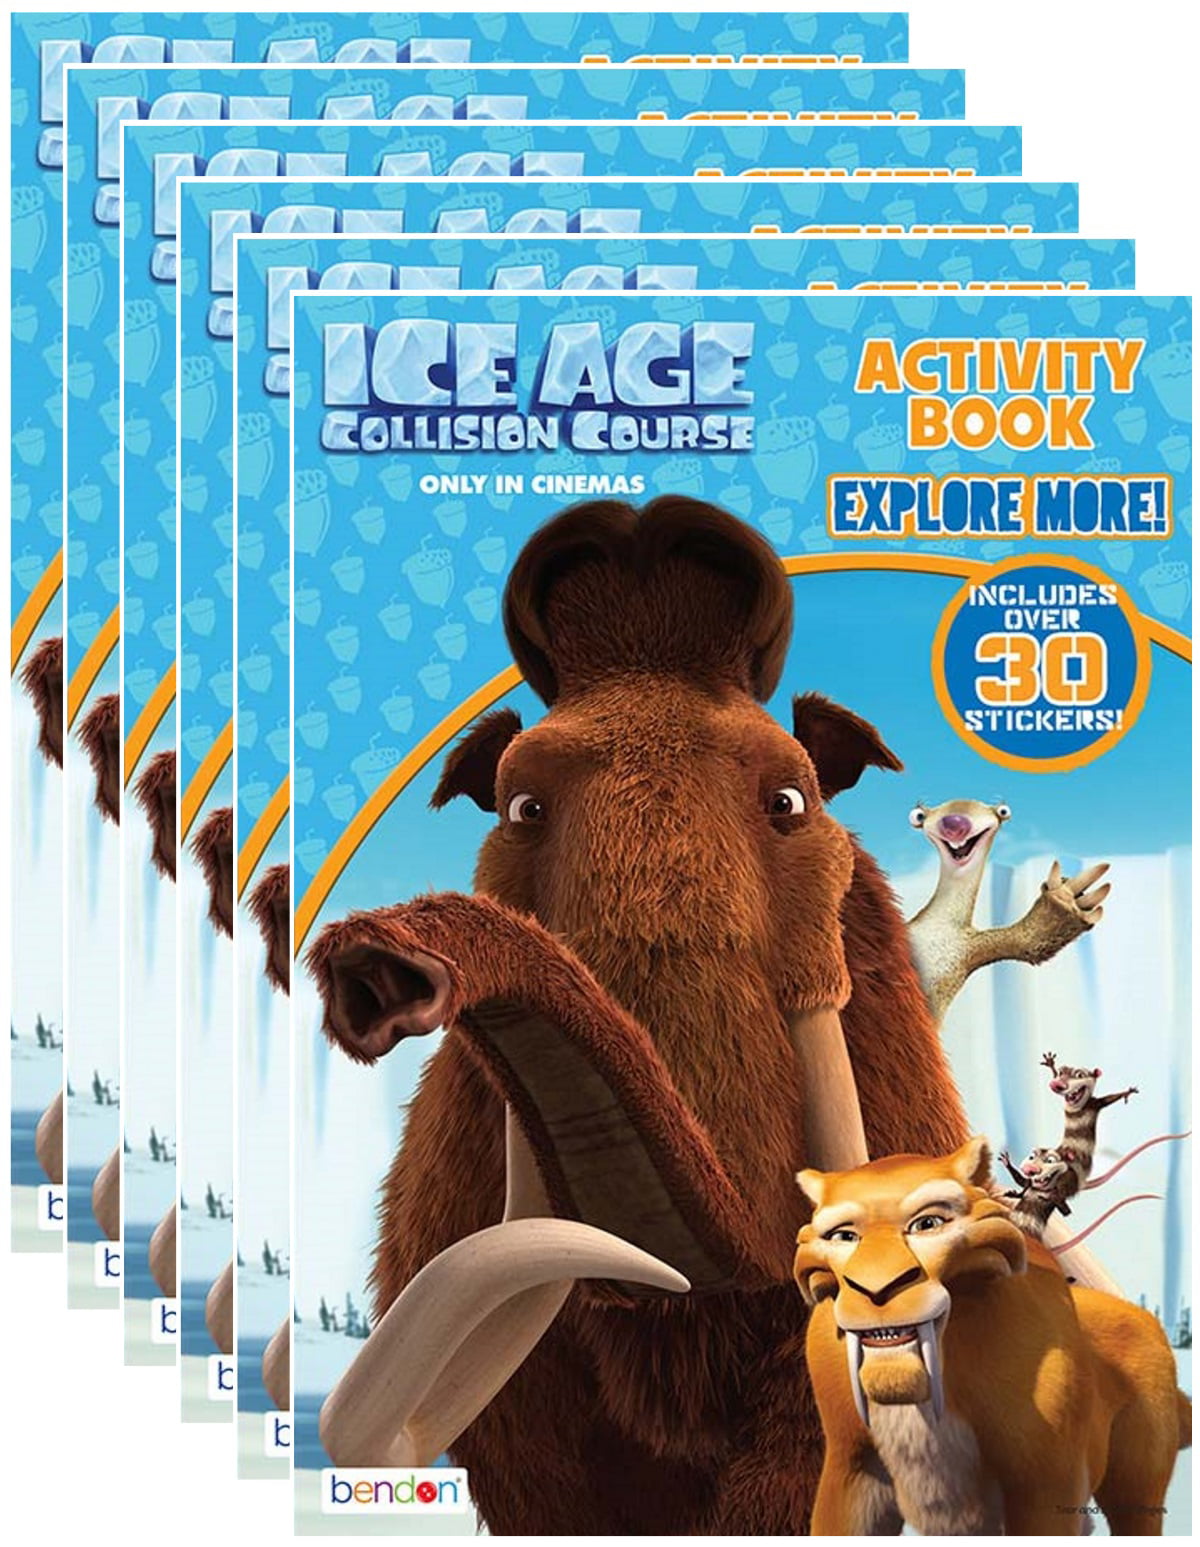 4 Boxes of Ice Age 5 Collision Course Stickers 200 Packs CLEARANCE 